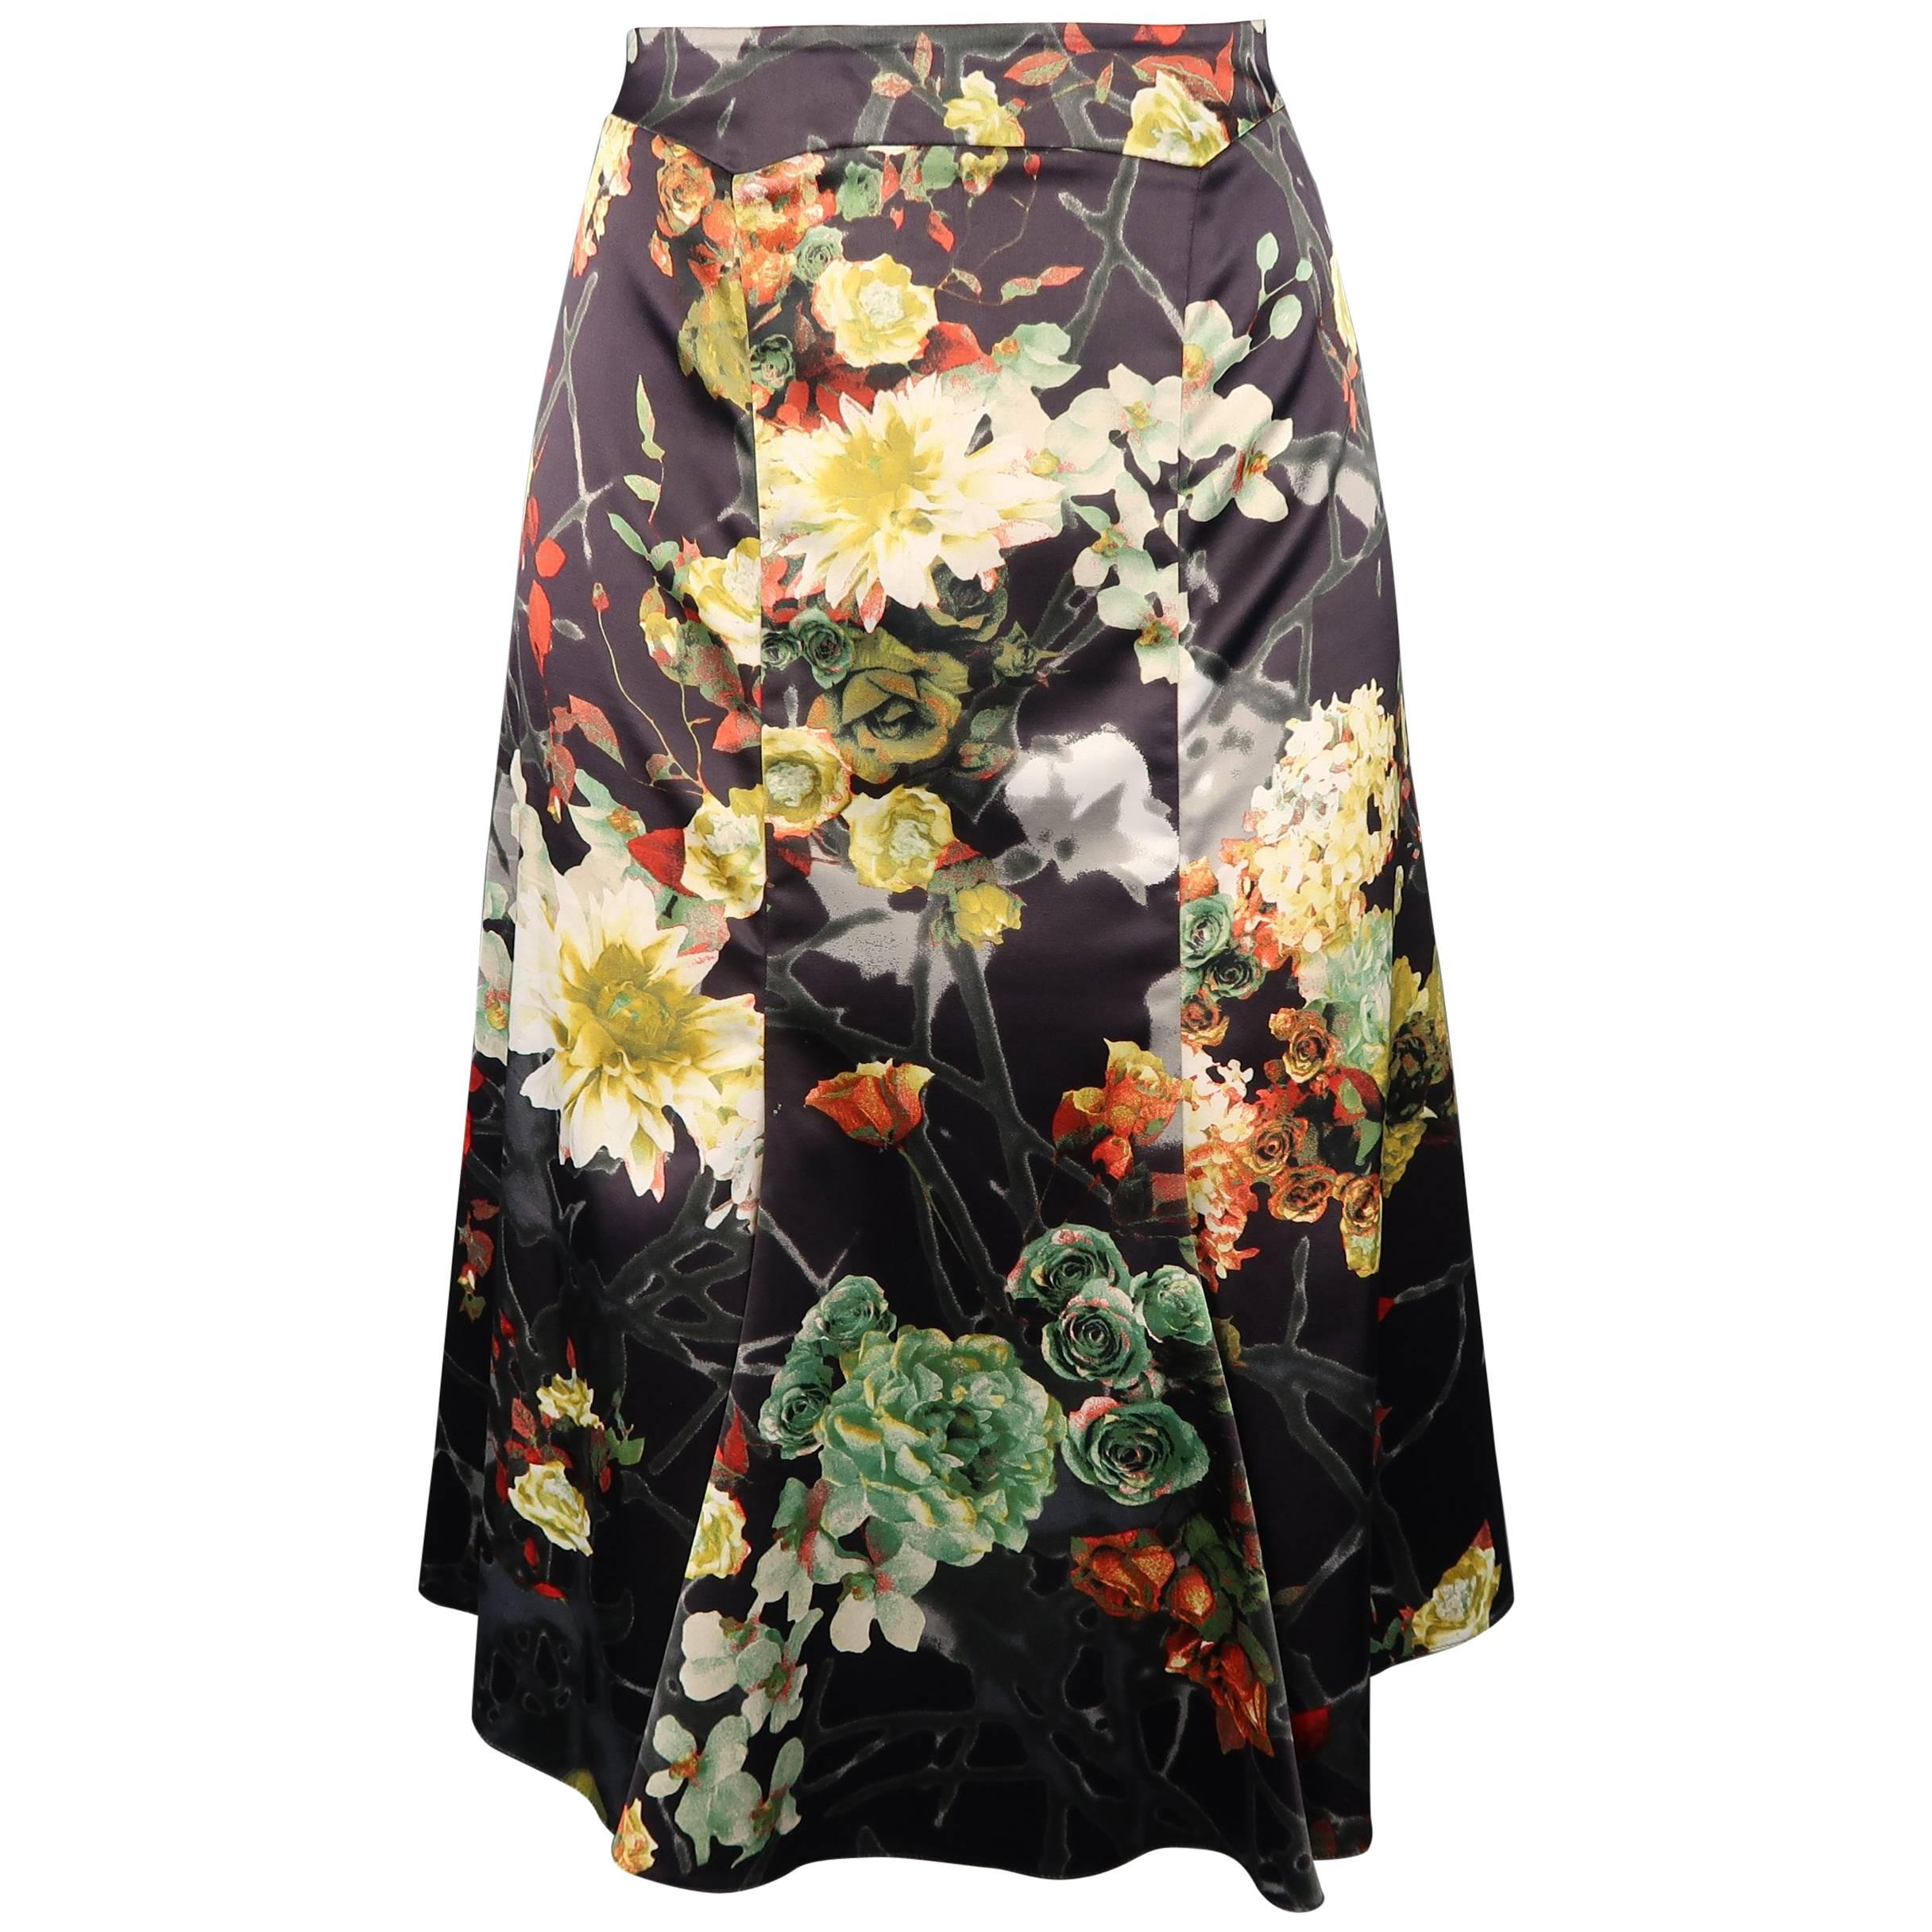 Just Cavalli Charcoal Multicolor Floral Print Satin Flare Skirt